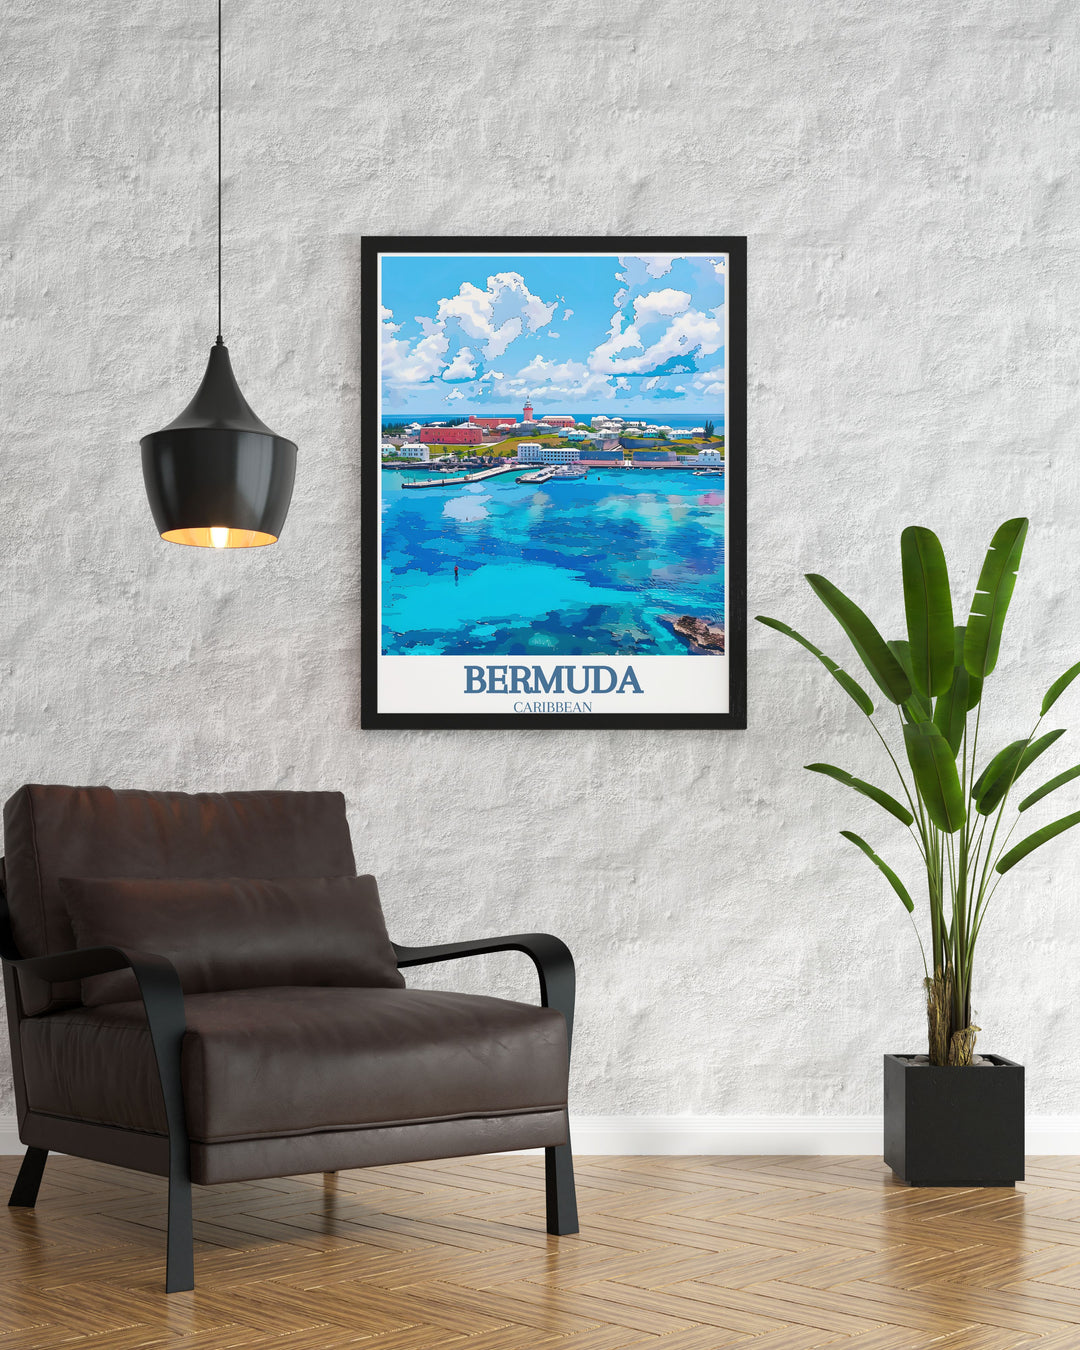 Elegant Bermuda wall art depicting St. Georges Town and St. Peters Church, showcasing the islands historical and architectural beauty. Perfect for adding sophistication and a touch of history to any room.